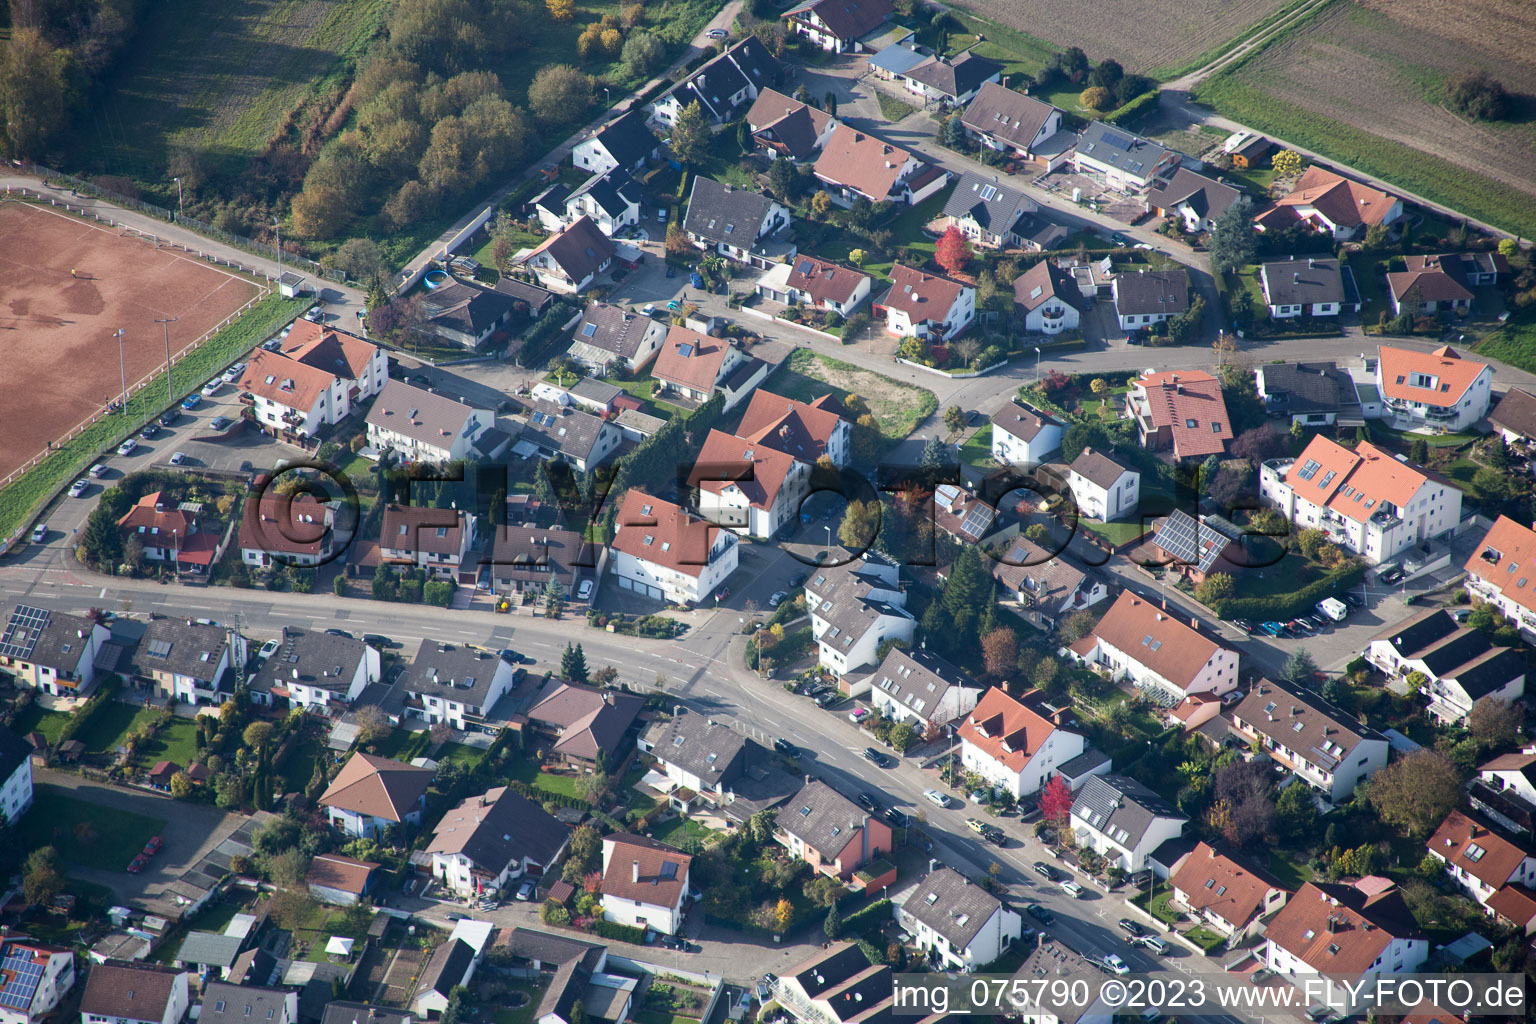 Hagenbach in the state Rhineland-Palatinate, Germany seen from above